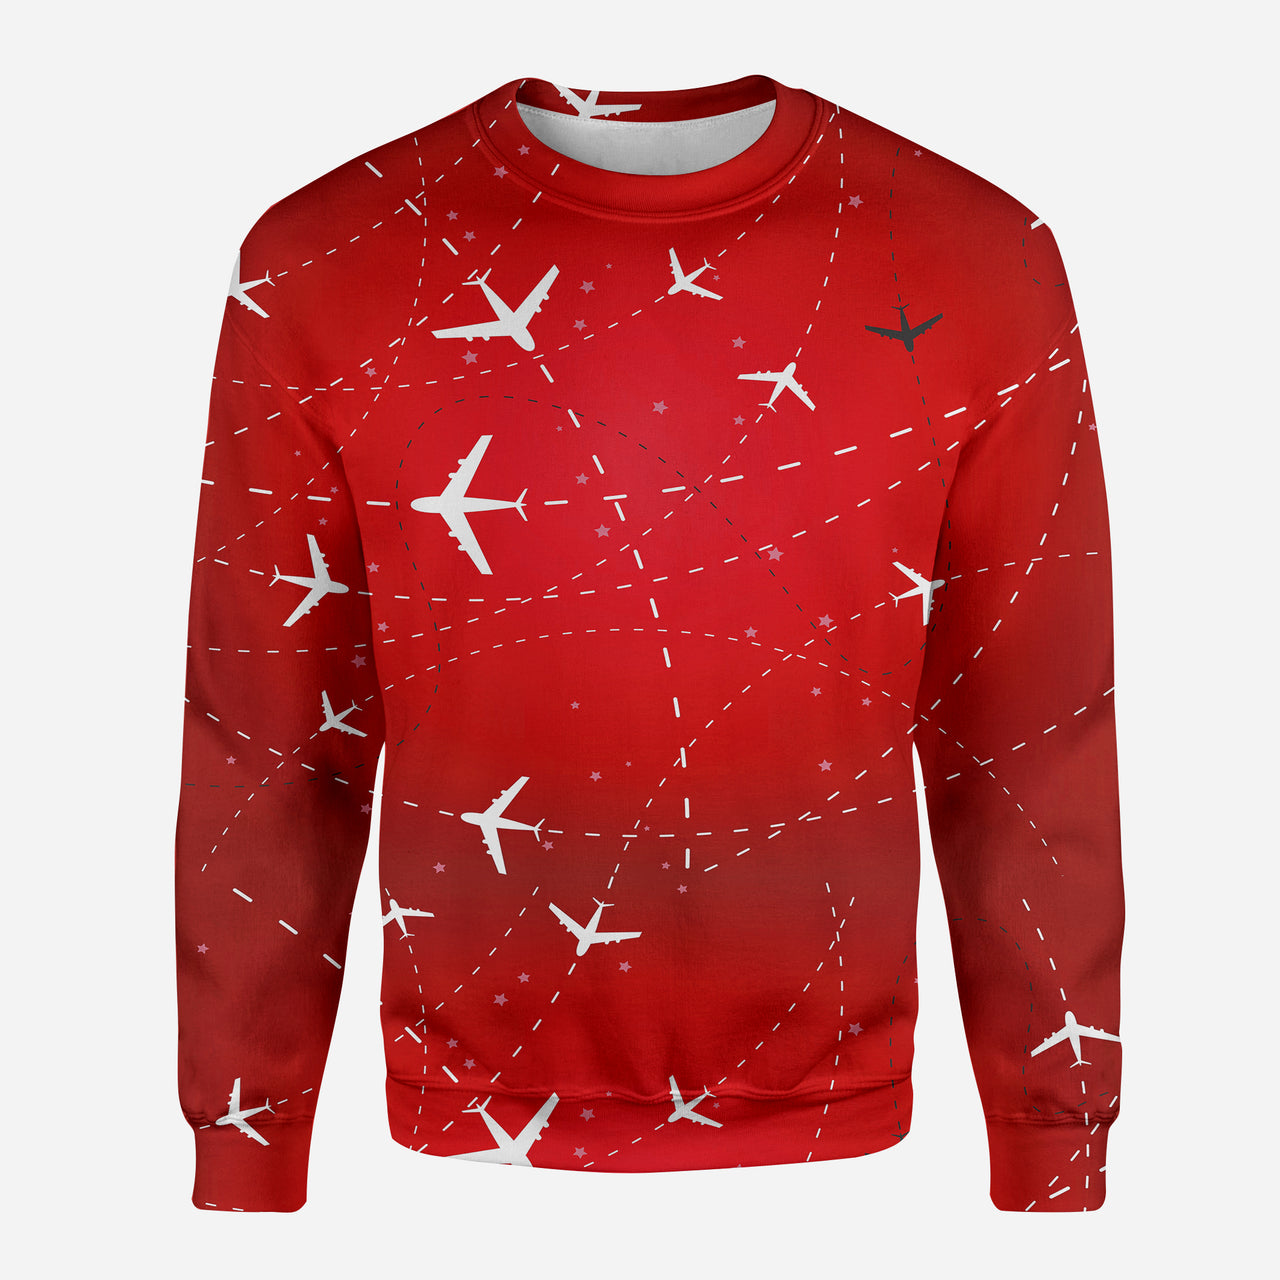 Travelling with Aircraft (Red) Designed 3D Sweatshirts